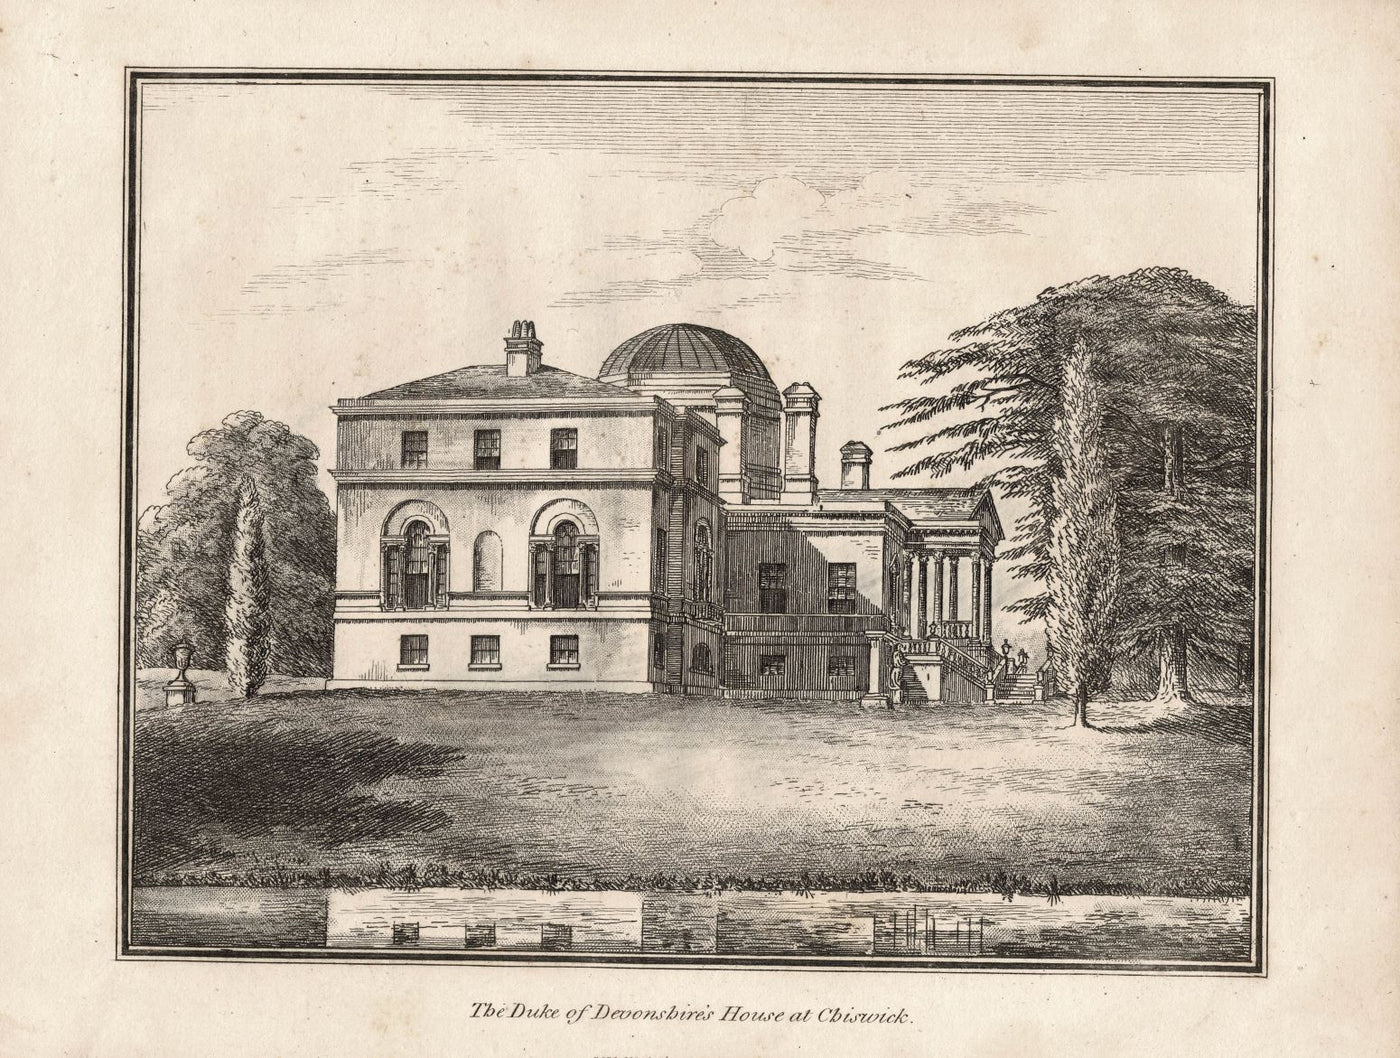 Chiswick House on the banks of the Thames antique print 1811